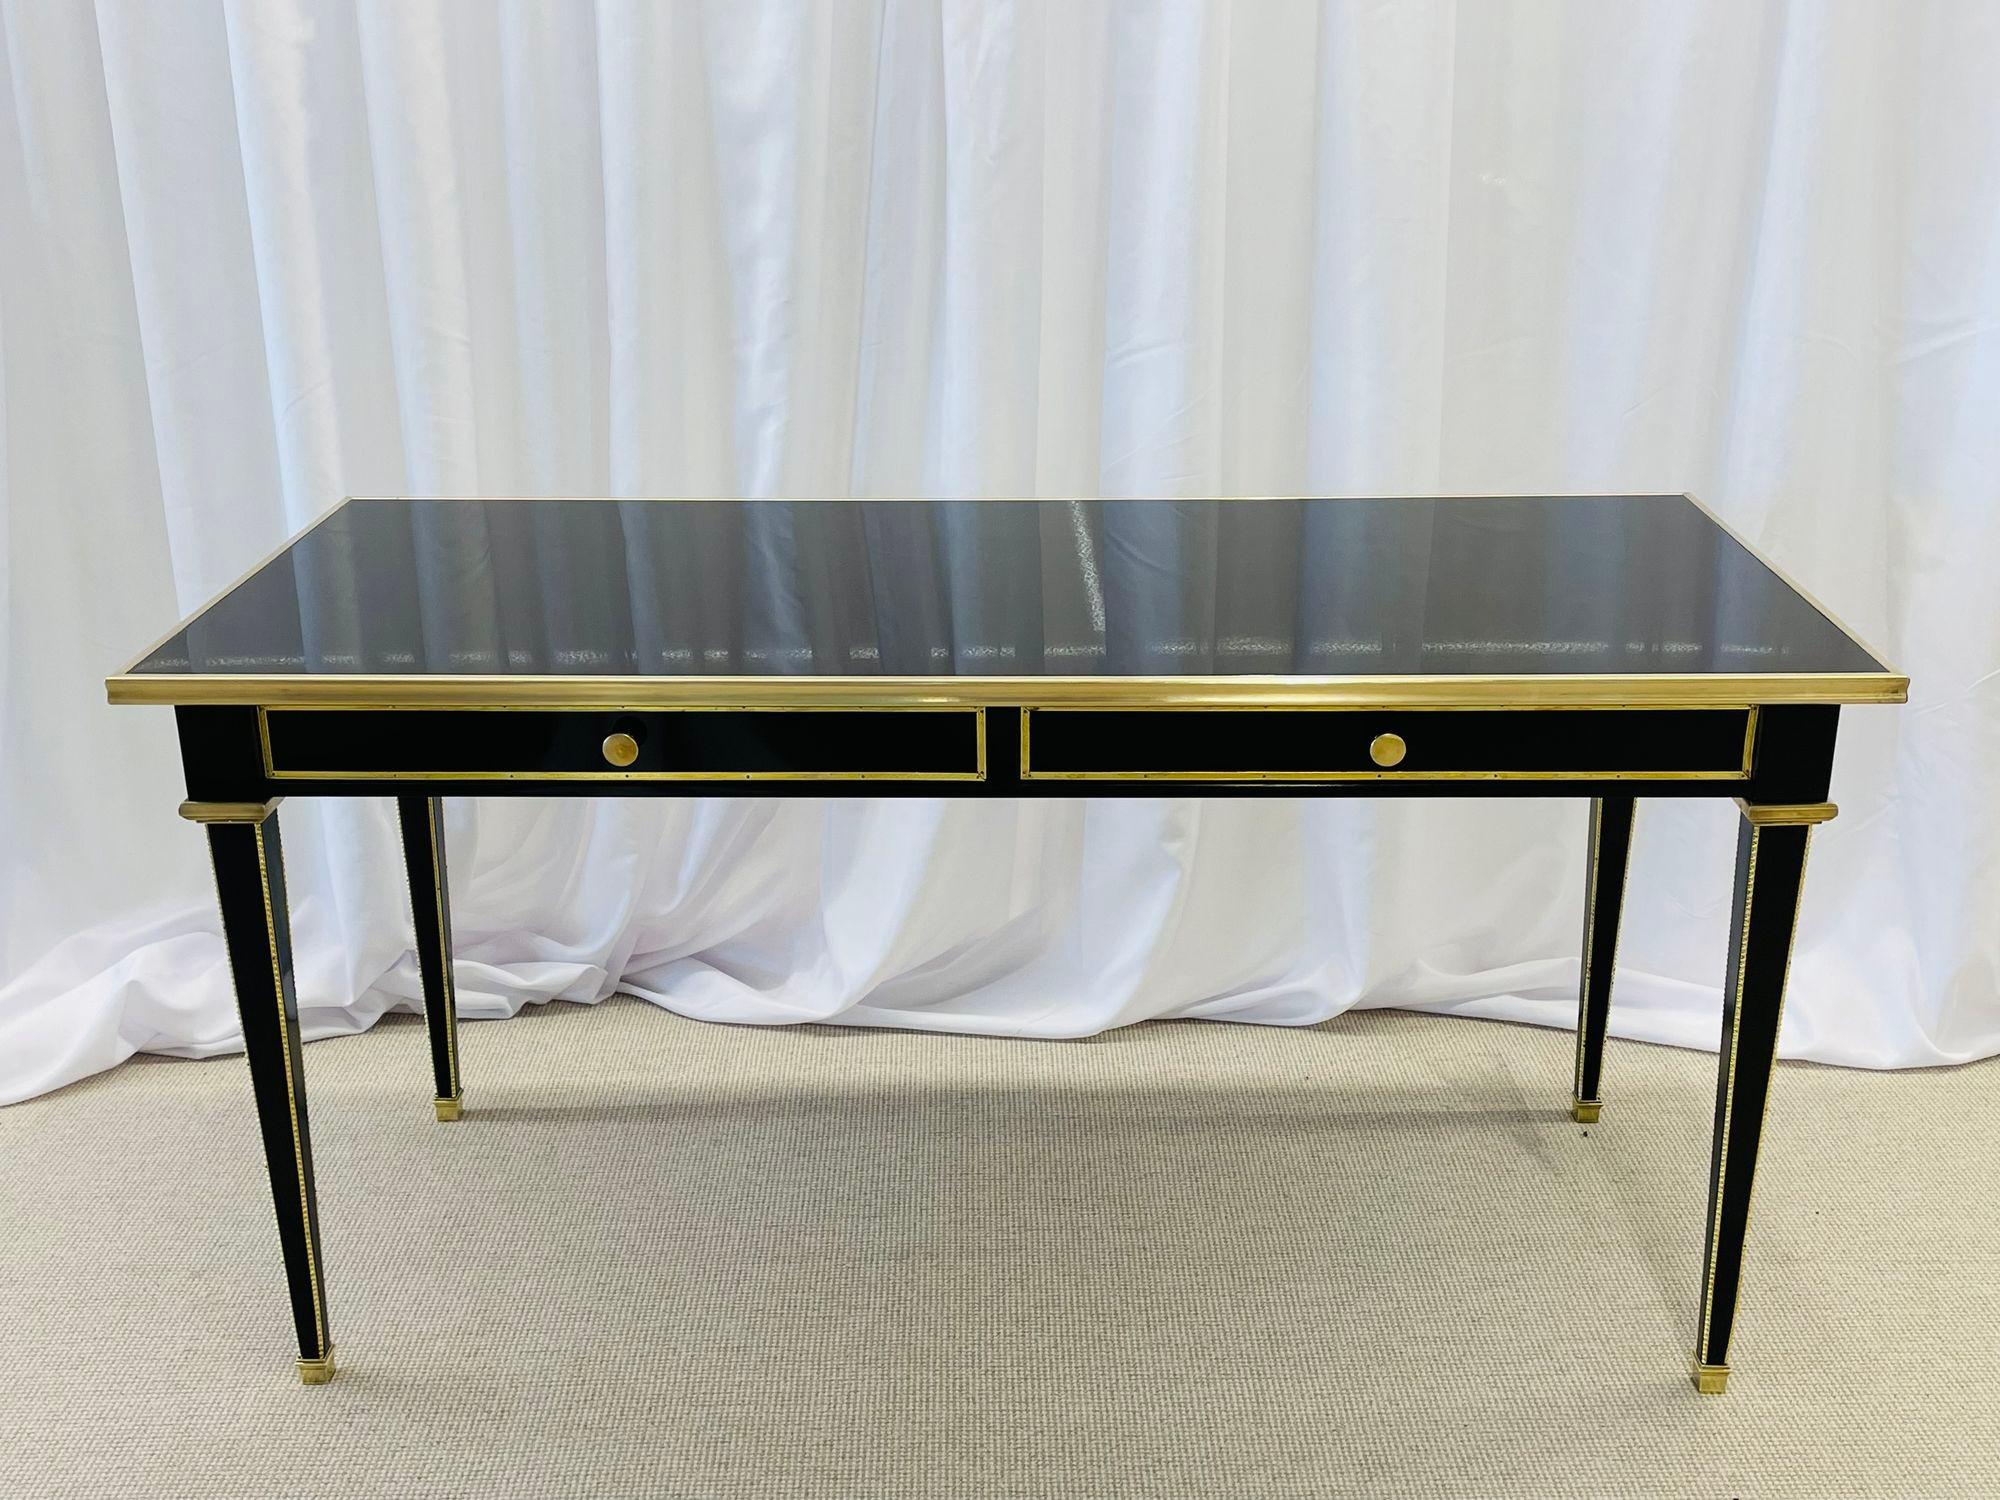 An Ebony French desk, writing table or vanity, Maison Jansen inspired, bronze, fully refinished
Stunning desk or writing table in the manner of Maison Jansen having a magnificent finish of black lacquer. The bronze reeded on all side legs terminate